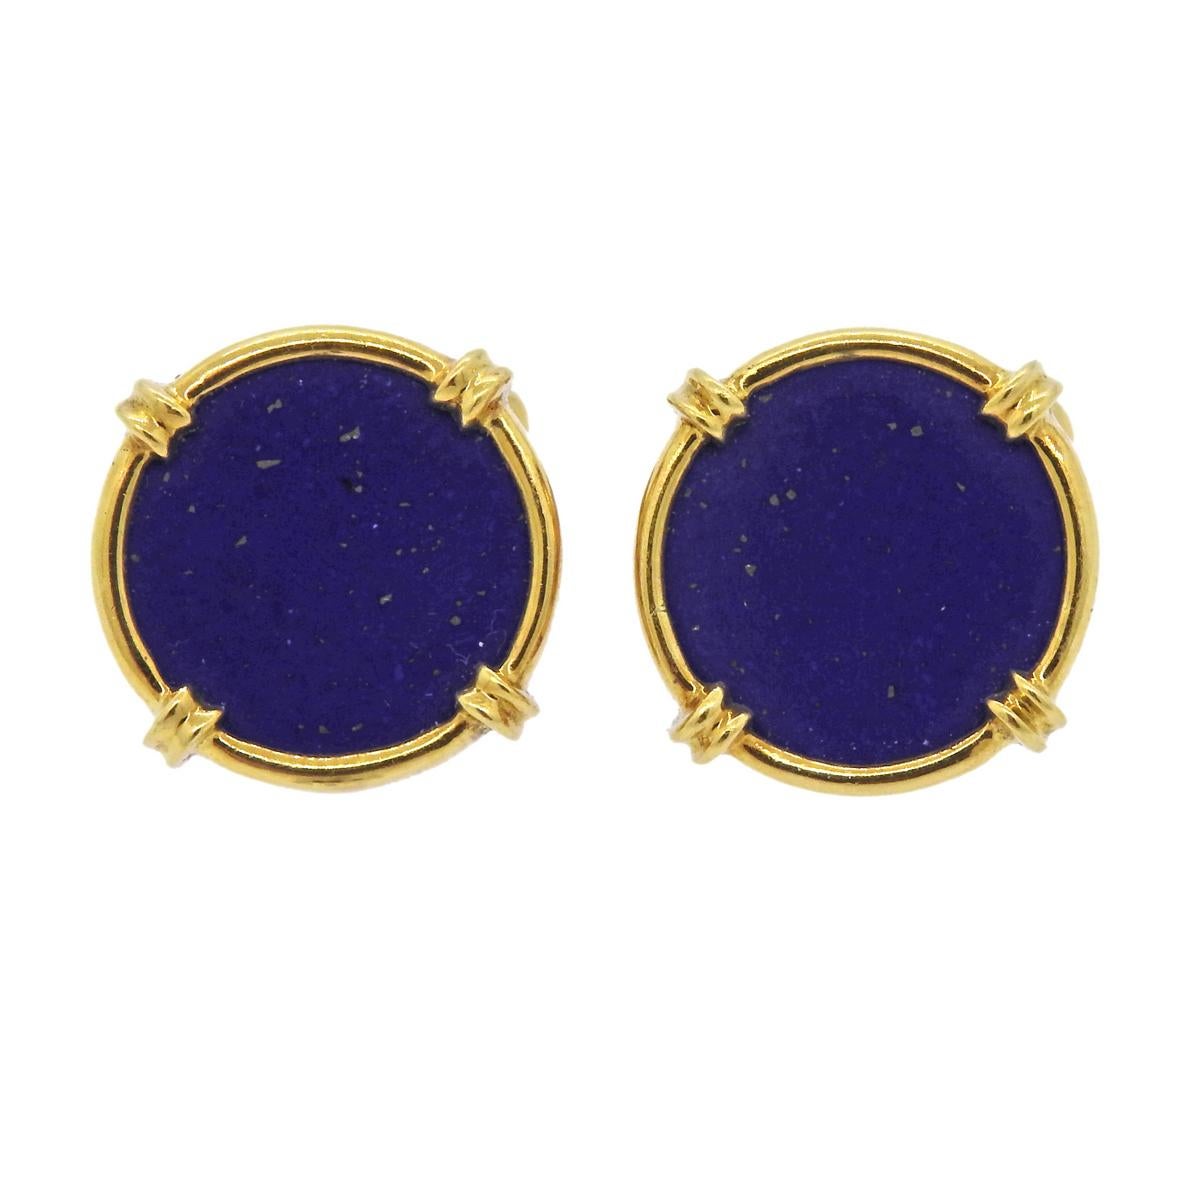 Pair of 18k gold lapis cufflinks. Cufflink tops measure 20mm in diameter and weigh 14.9 grams. Marked 750. 